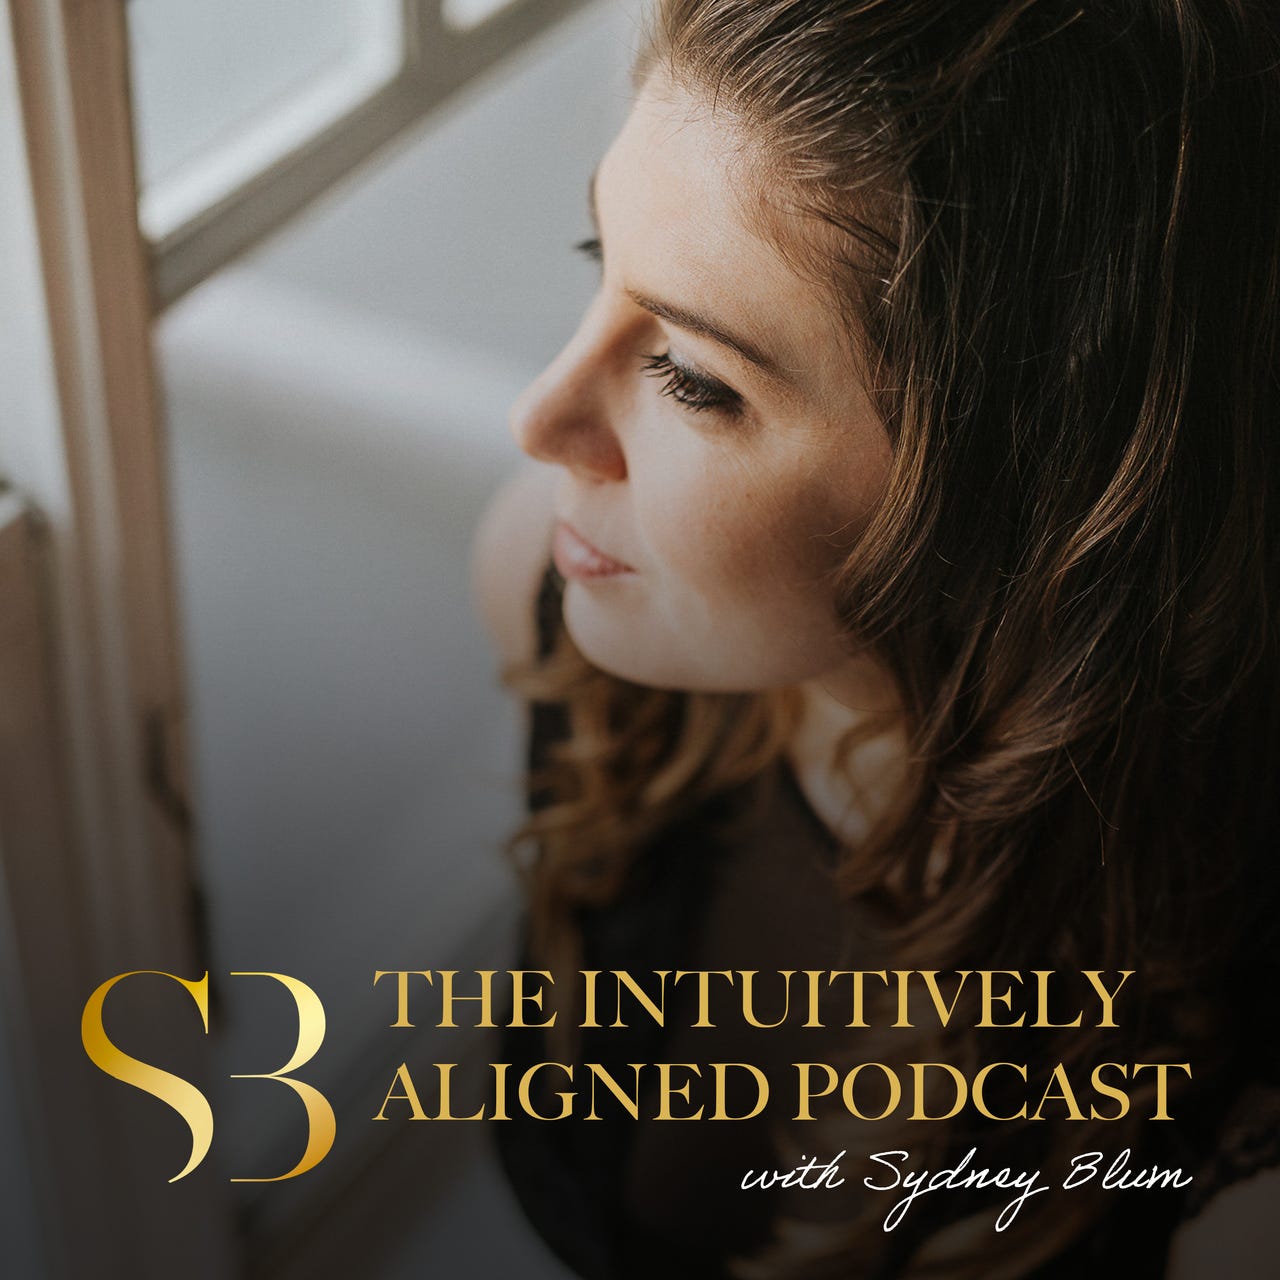 The Intuitively Aligned Podcast with Sydney